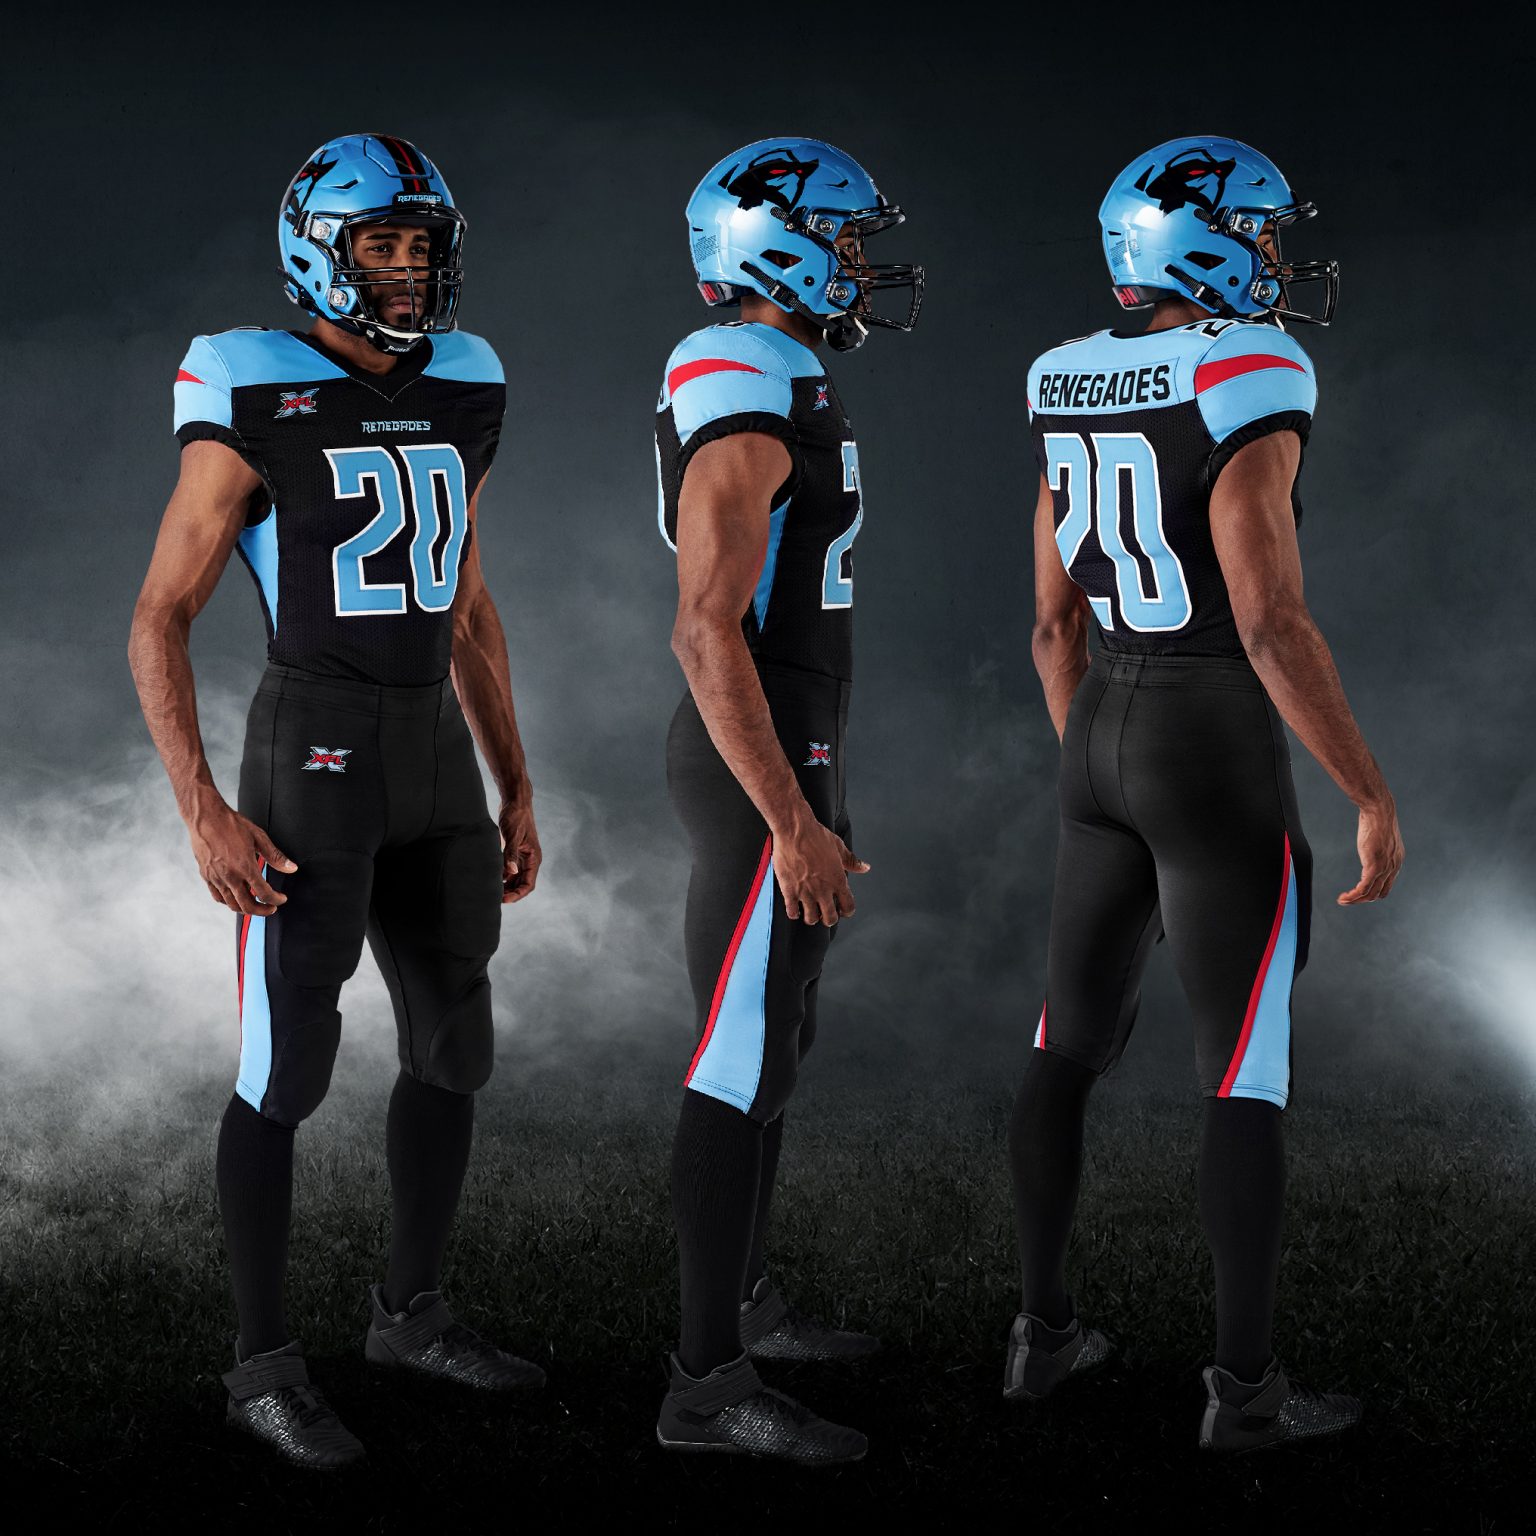 All Eight XFL Uniforms, Helmets And Jerseys Revealed